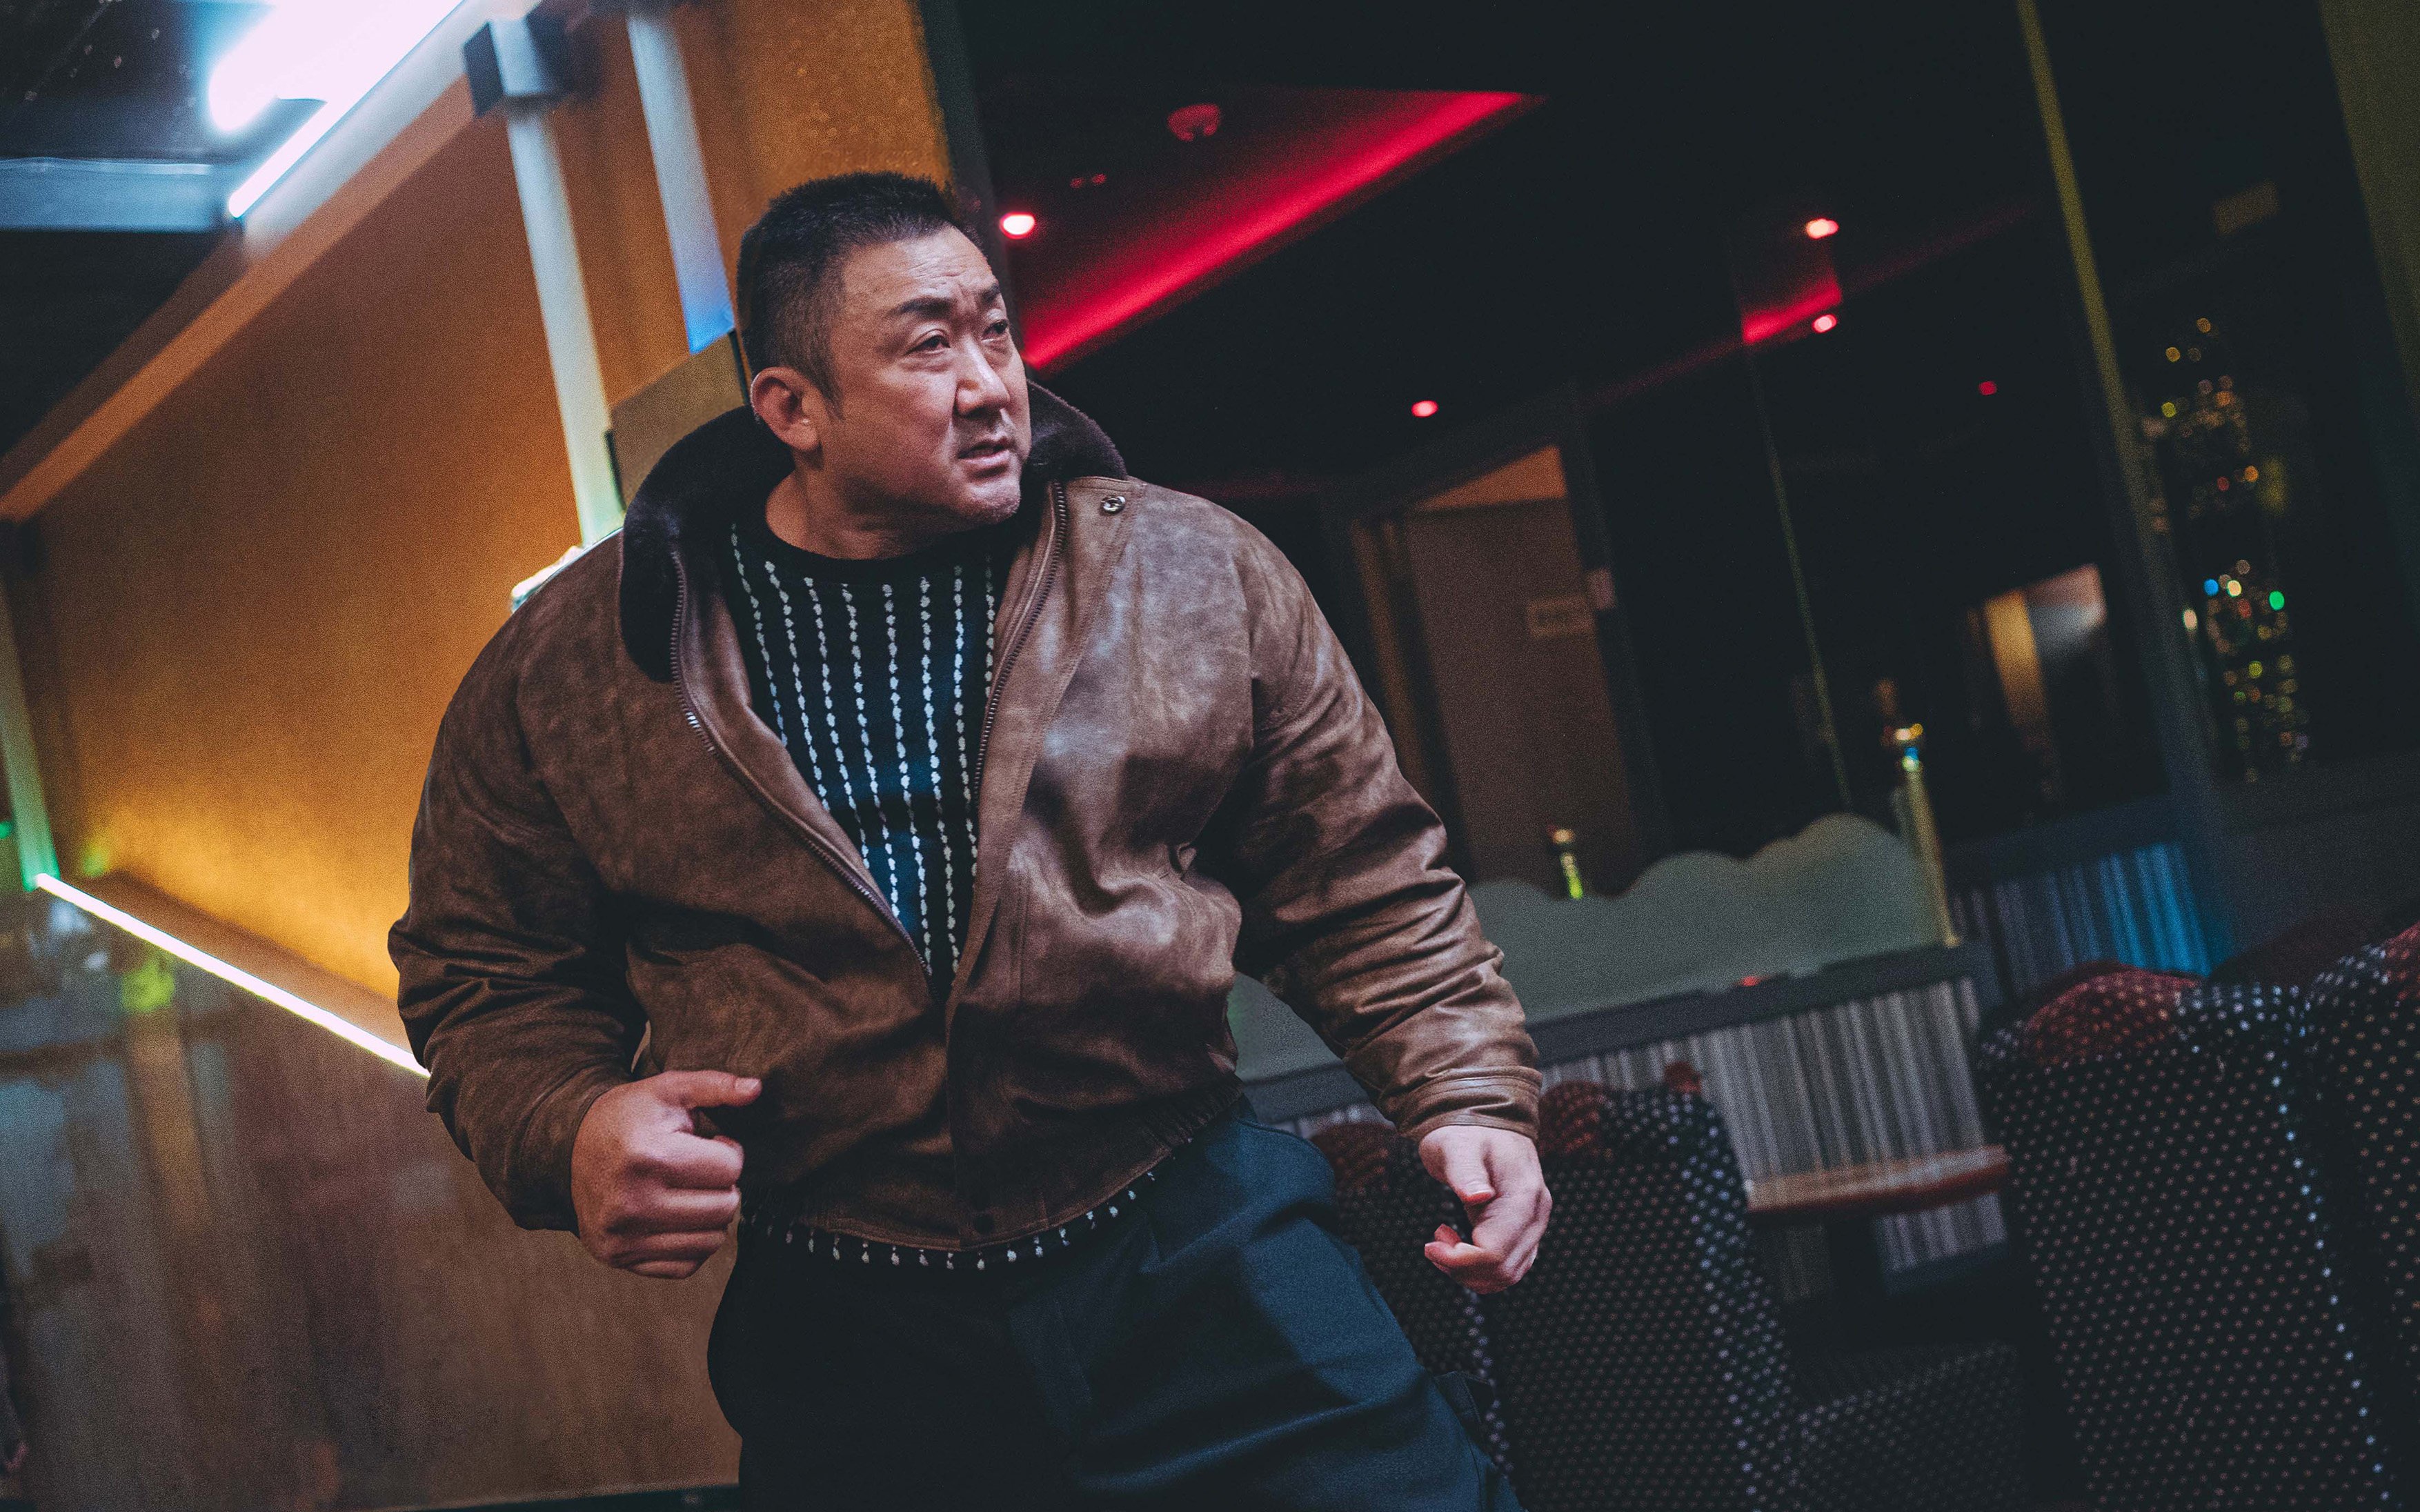 Ma Dong-seok as po-faced detective Ma in a still from The Roundup: Punishment (category TBC). Directed by Heo Myeong-haeng and co-starring Kim Moo-yeol and Park Ji-hwan. Photo: ABO Entertainment & Bigpunch Pictures & Hong Film & B.A. Entertainment